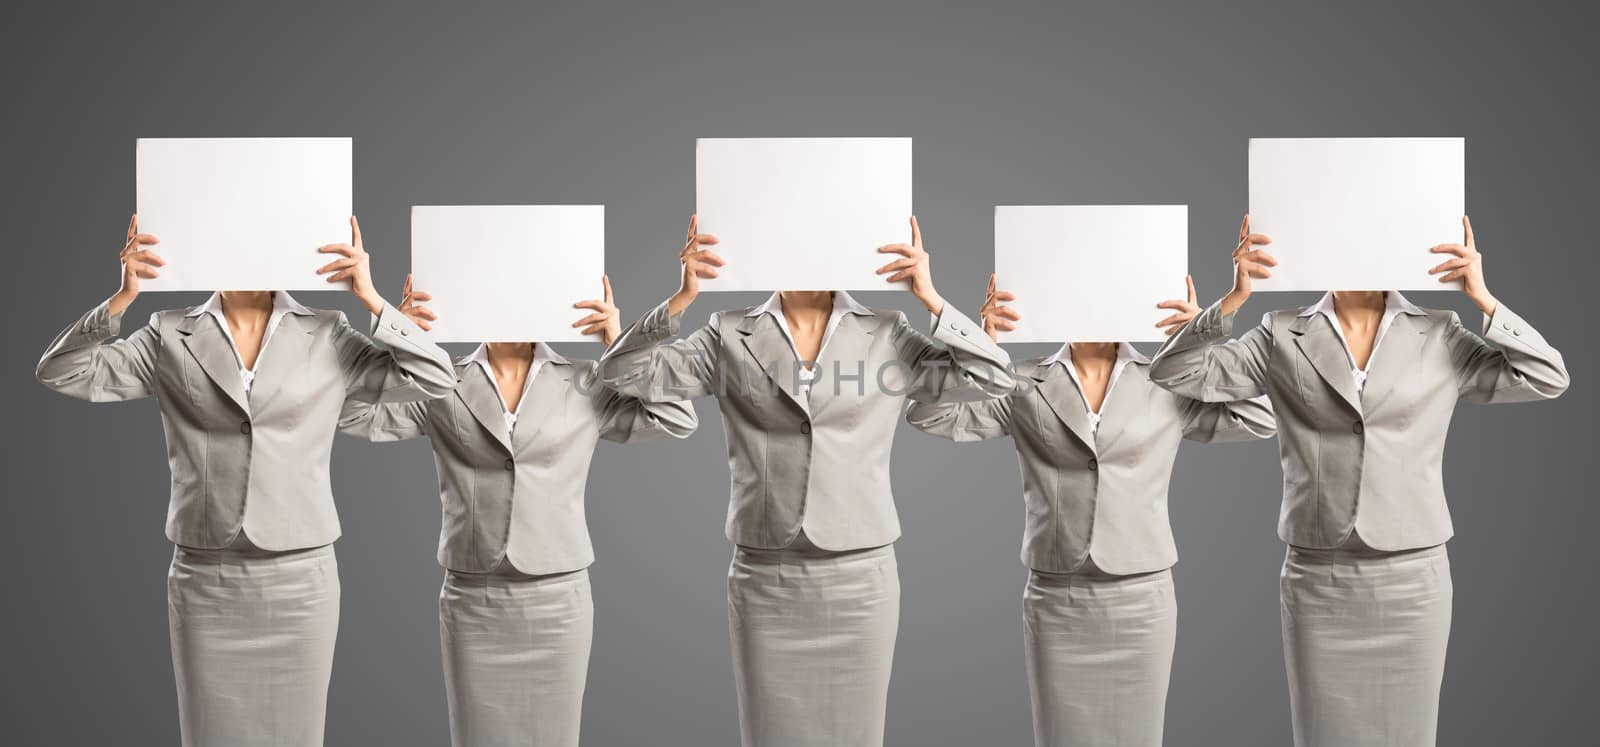 image of a businesswomen standing in a row, held in front of a blank poster